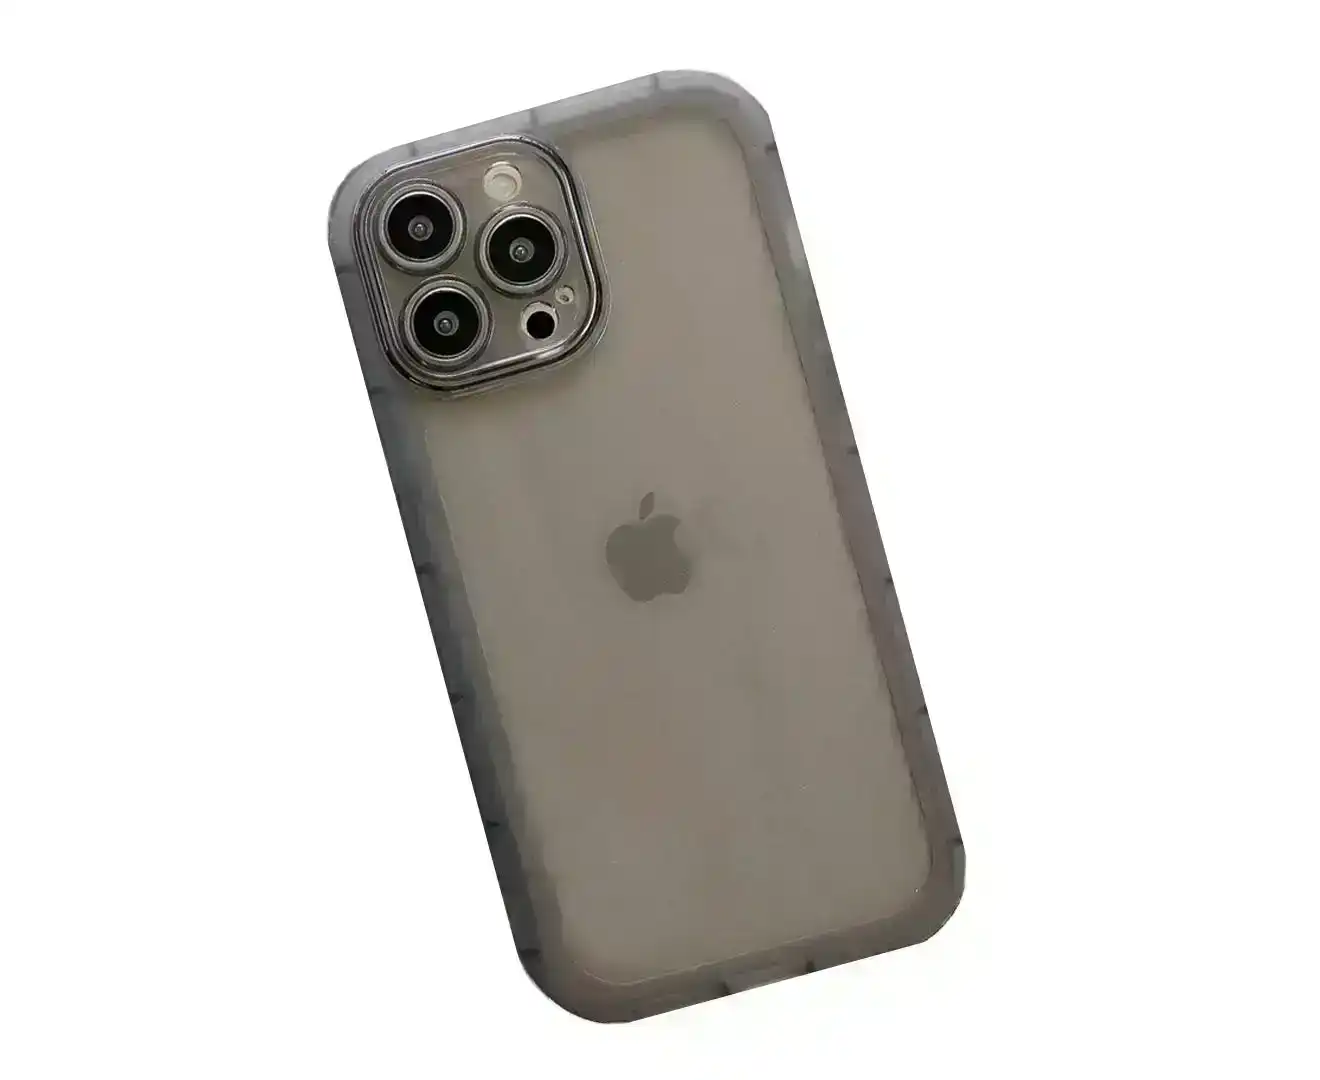 Anymob iPhone Case Gray Transparent Matte Soft Silicone Mobile Cover Compatible